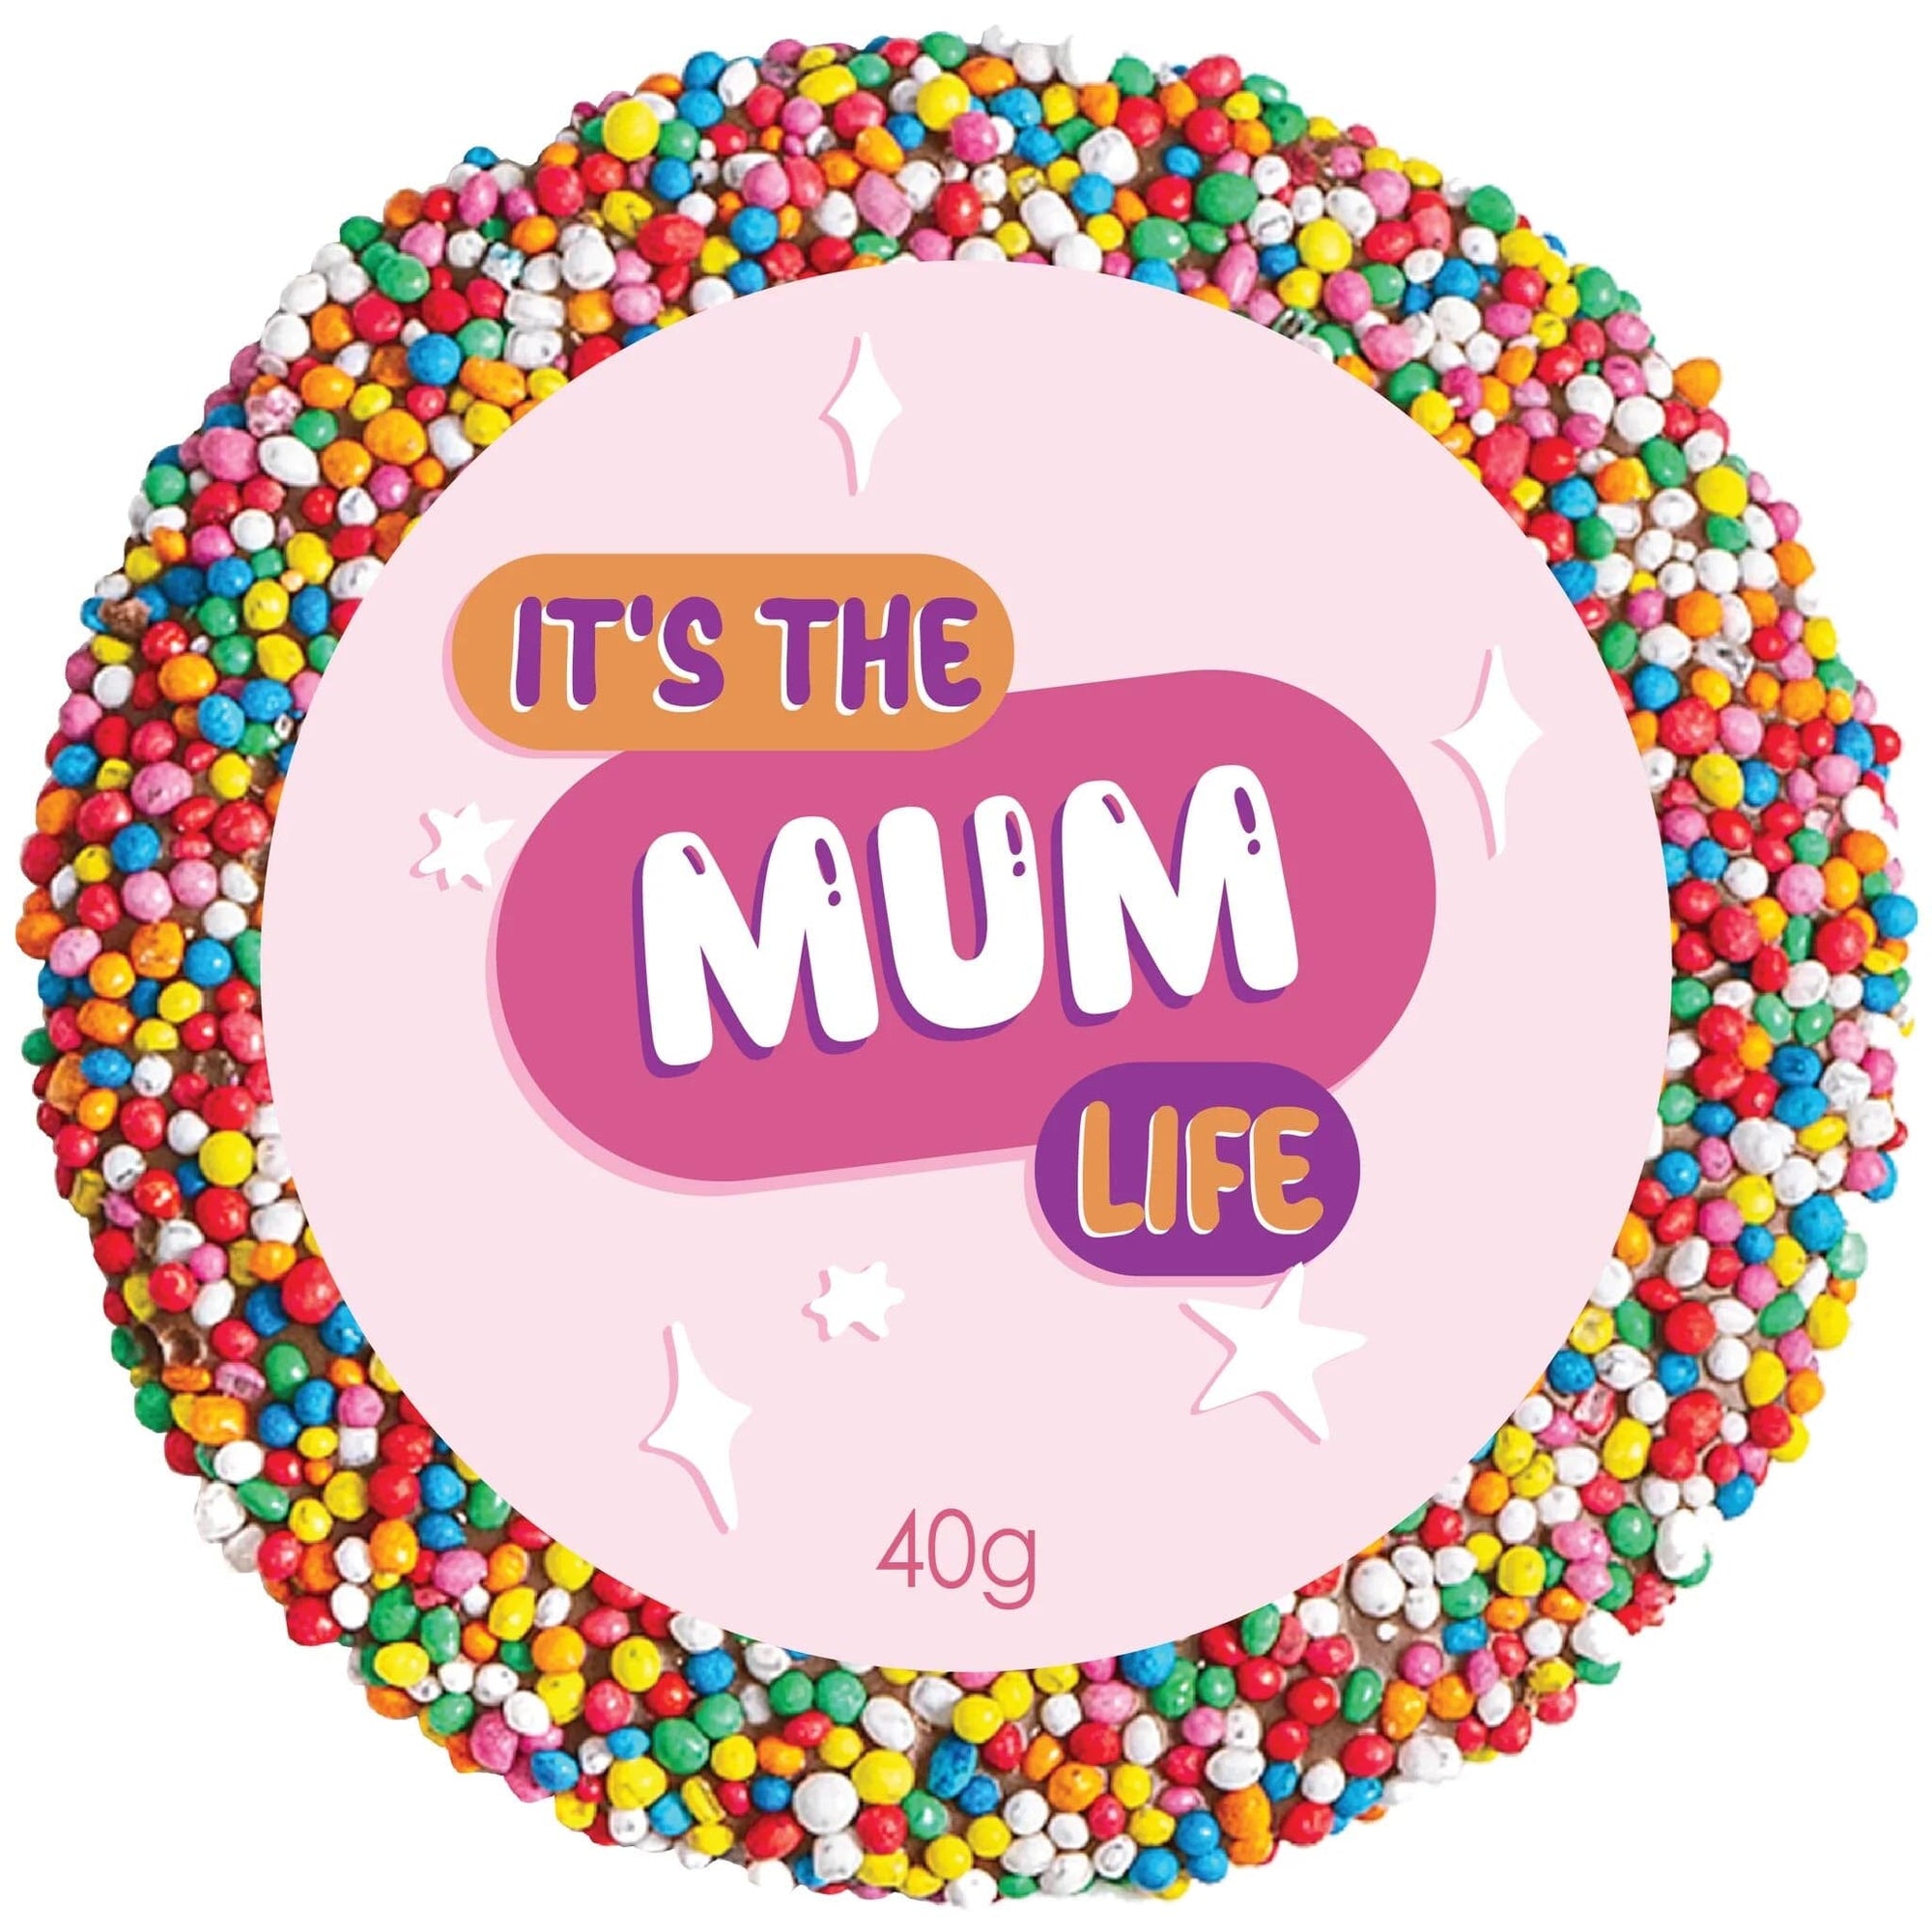 Mothers Day Single Speckle (Mum Life)